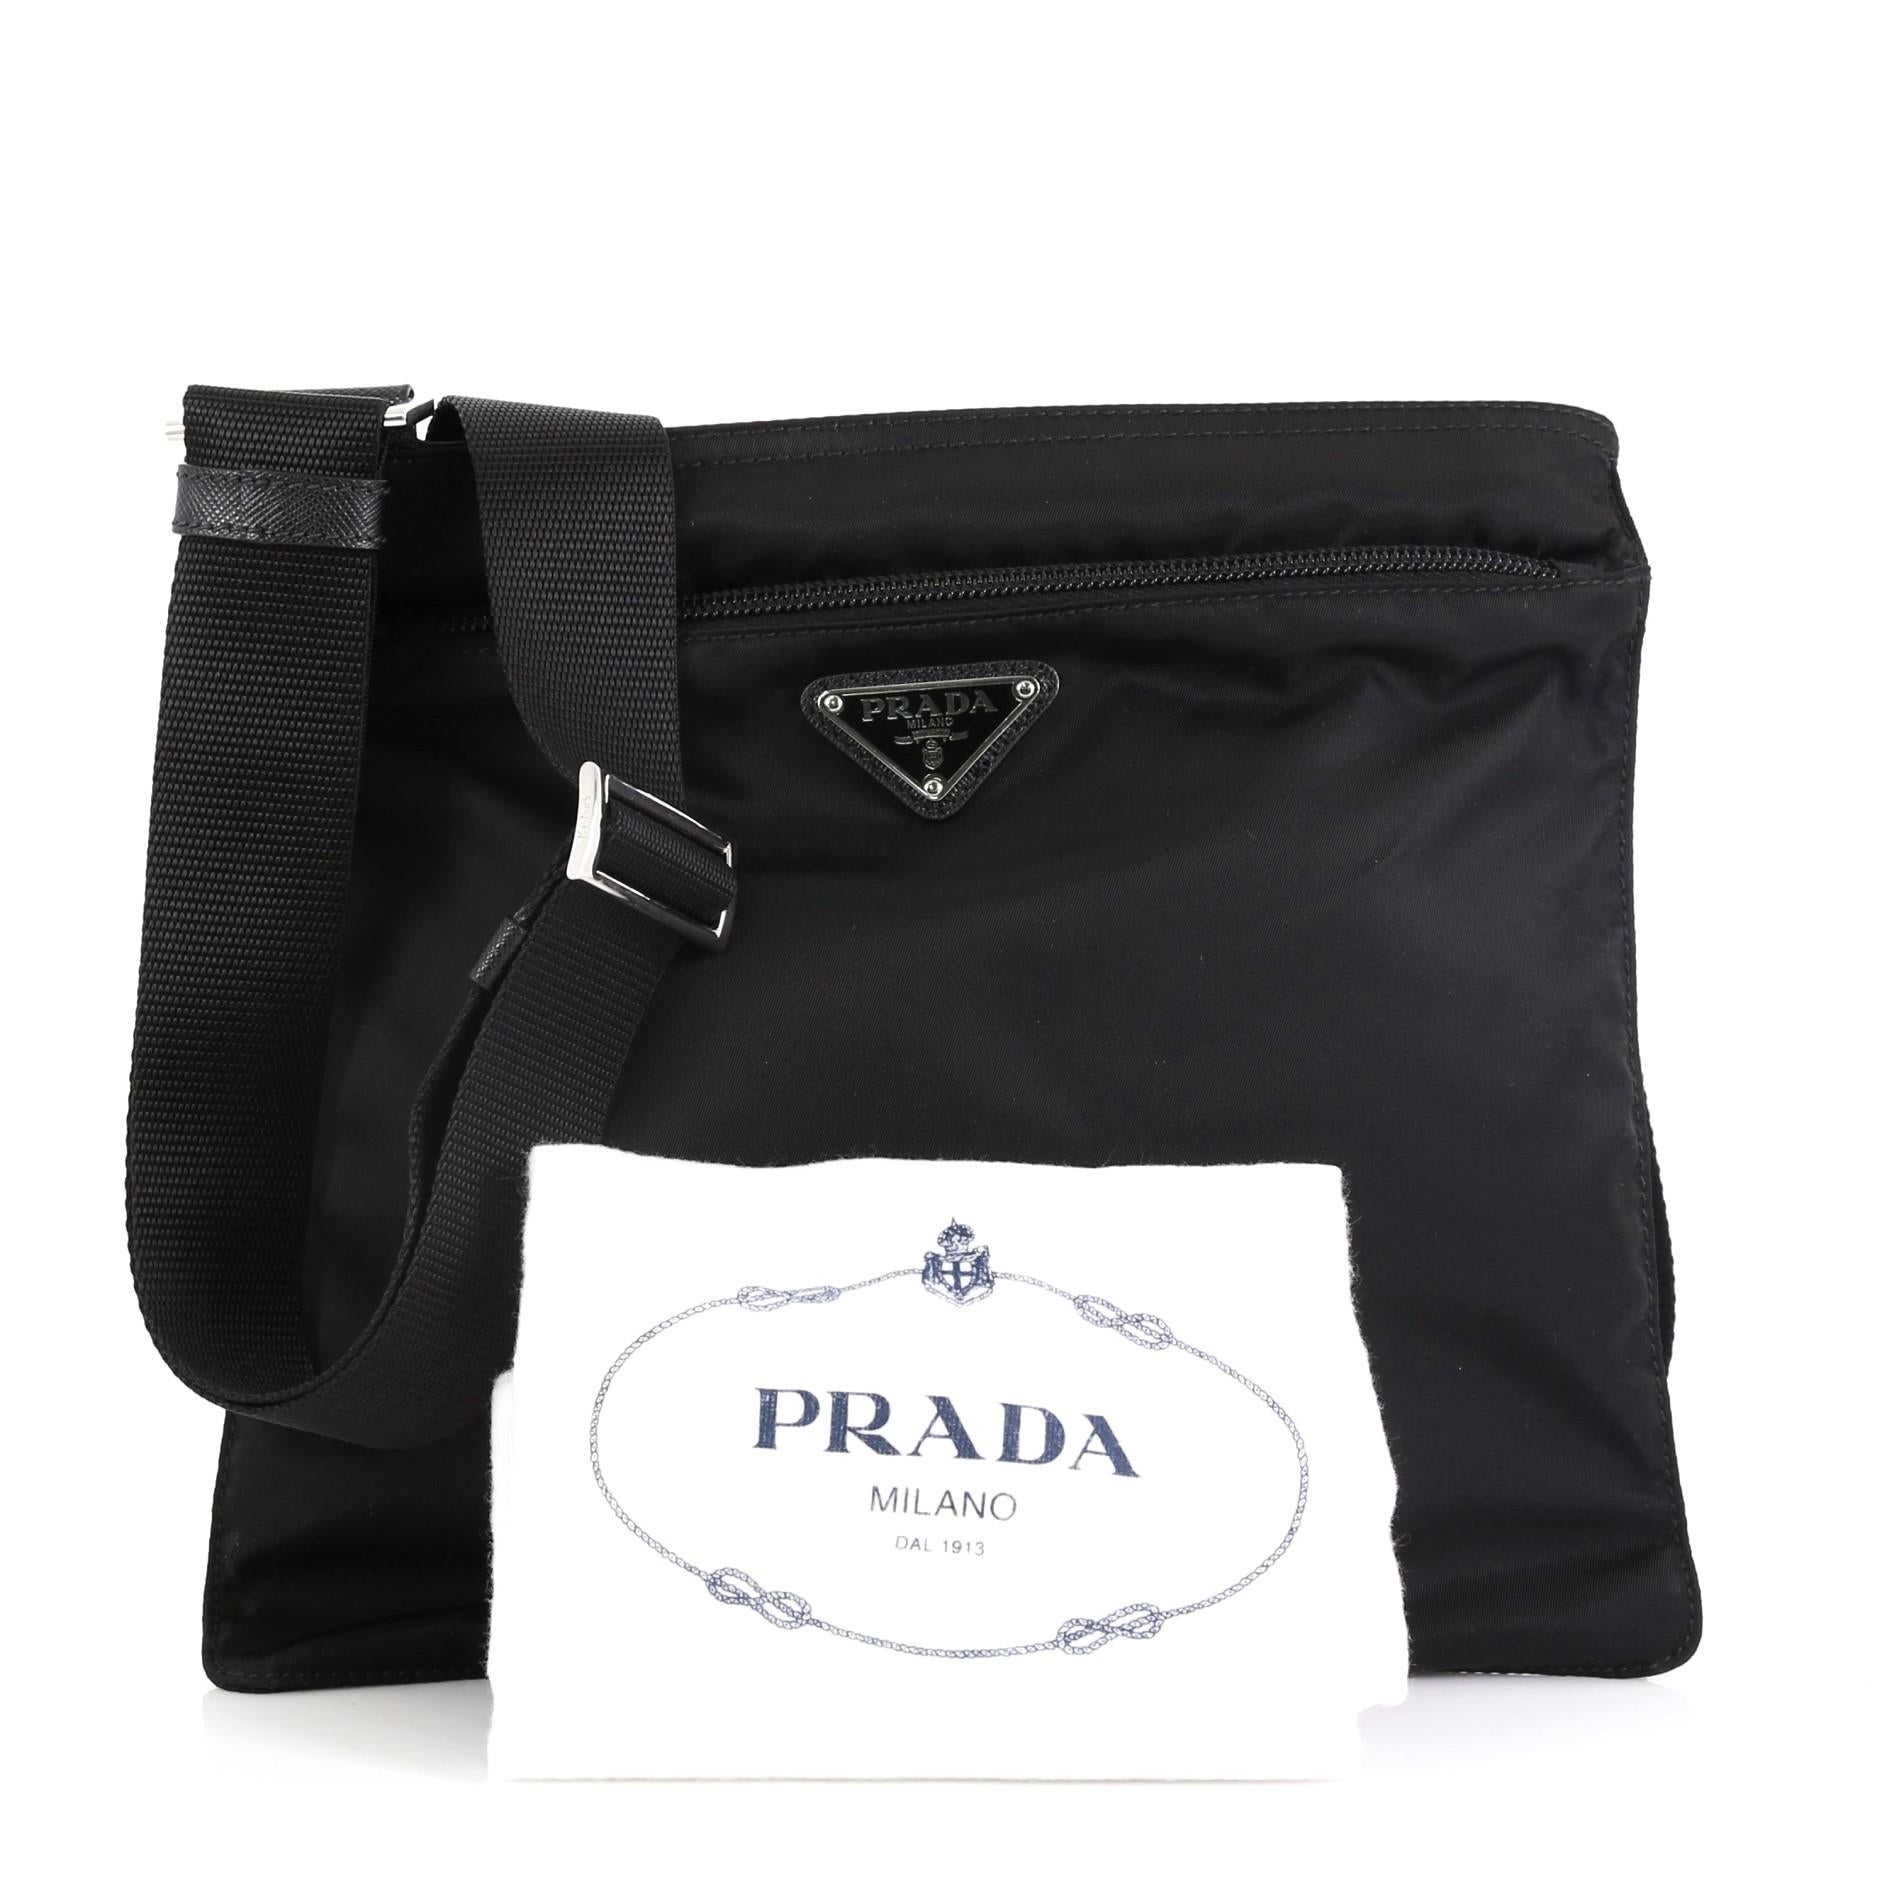 This Prada Zip Messenger Bag Tessuto Medium, crafted from black tessuto, features adjustable shoulder strap, exterior zip pocket, and silver-tone hardware. Its top zip closure opens to a black nylon interior. 

Condition: Excellent. Minor scuffs on